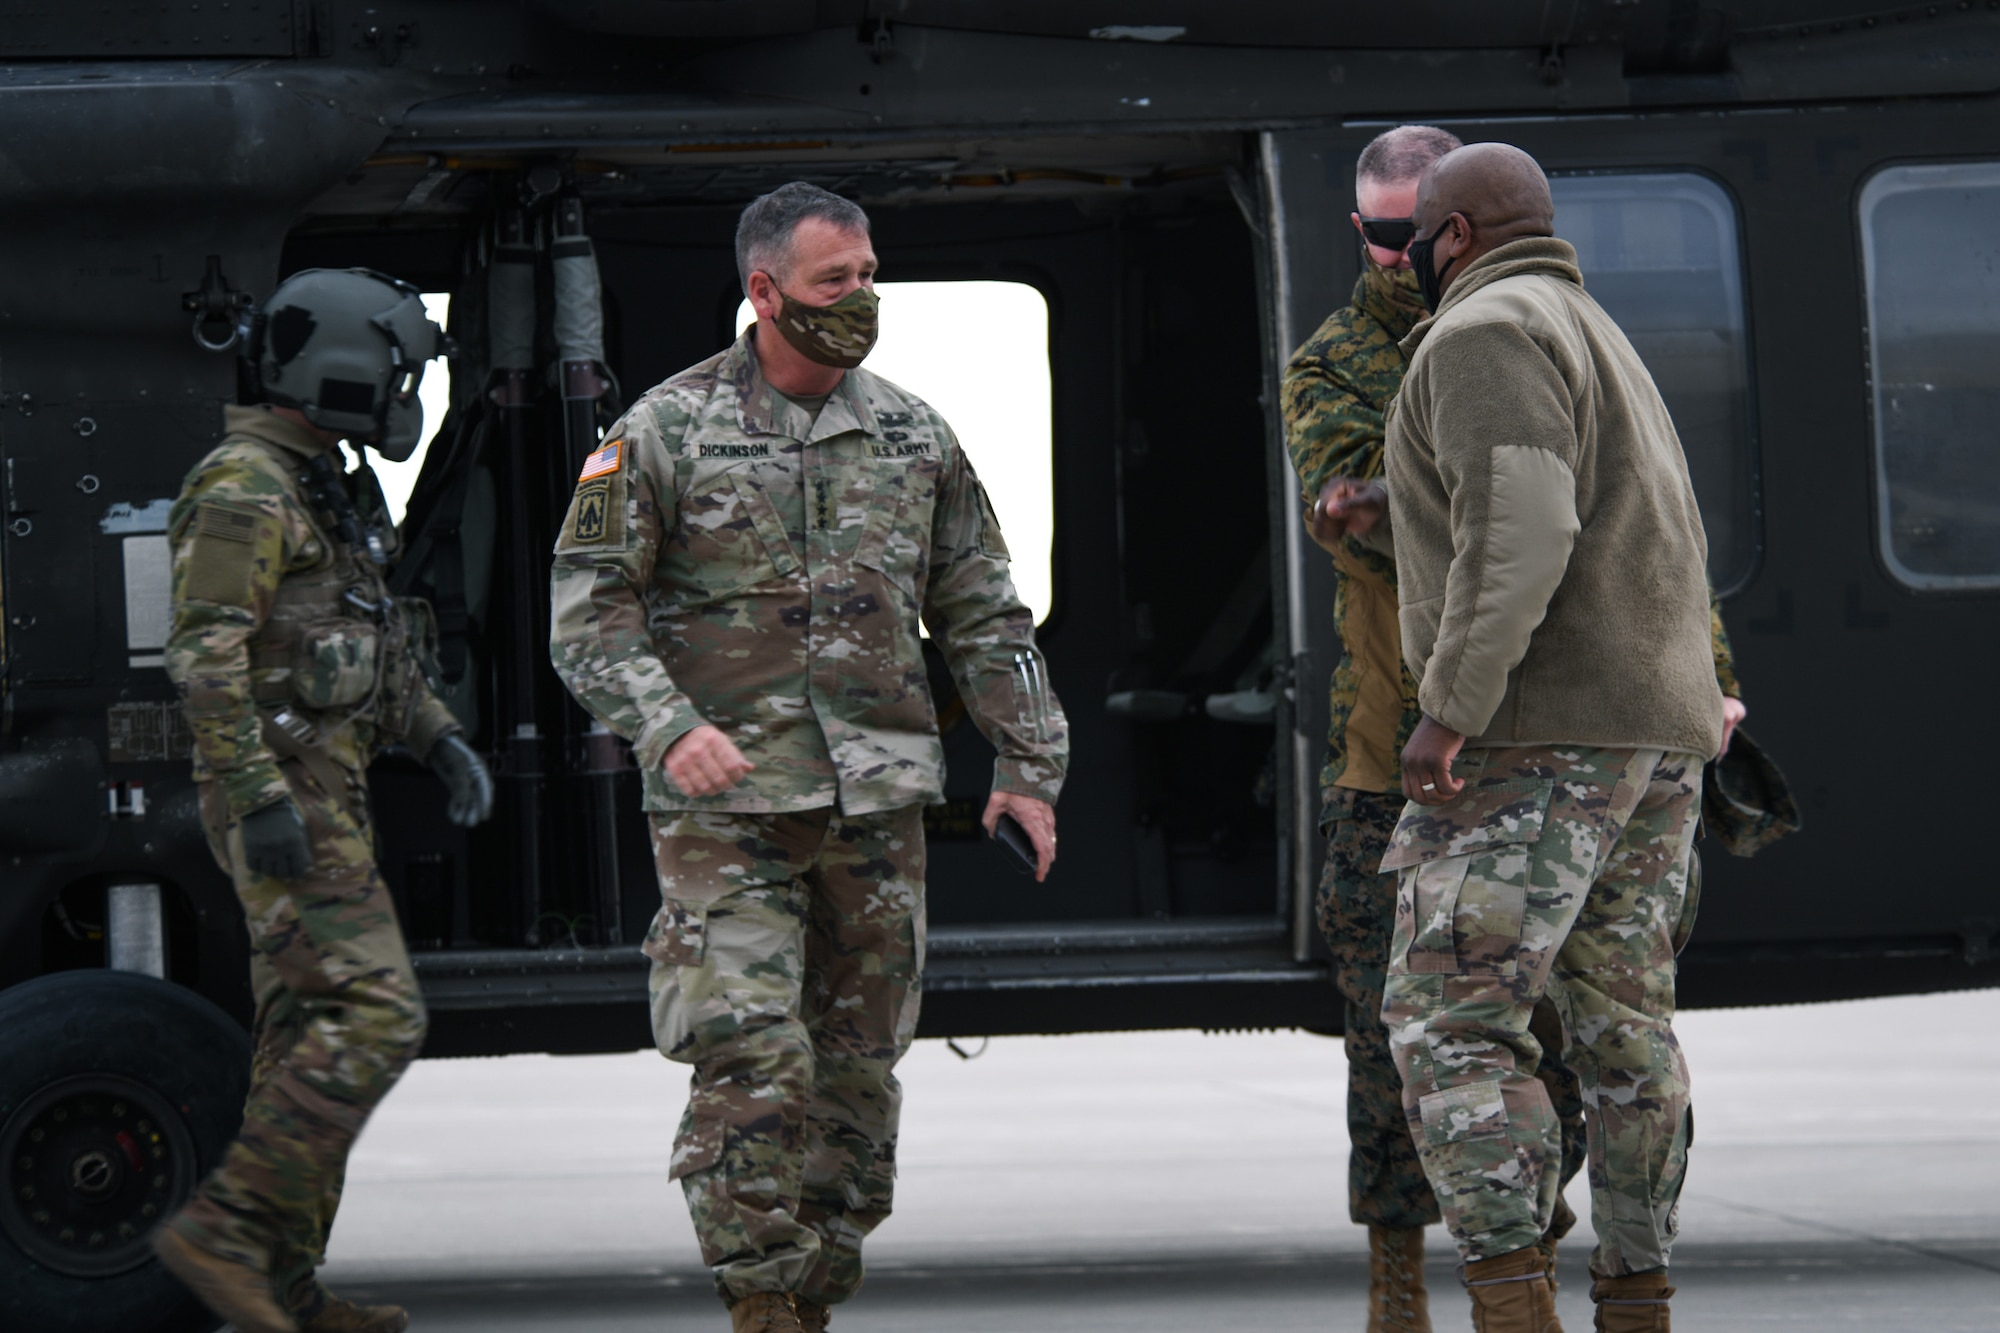 U.S. Army Gen. James Dickinson, left, U.S. Space Command commander, and U.S. Marine Corps Master Gunnery Sgt. Scott H. Stalker, USSPACECOM senior enlisted leader, are greeted by U.S. Air Force Col. Devin Pepper, far right, Buckley Garrison commander, on the flightline on Buckley Air Force Base, Colo., Jan. 7, 2021.